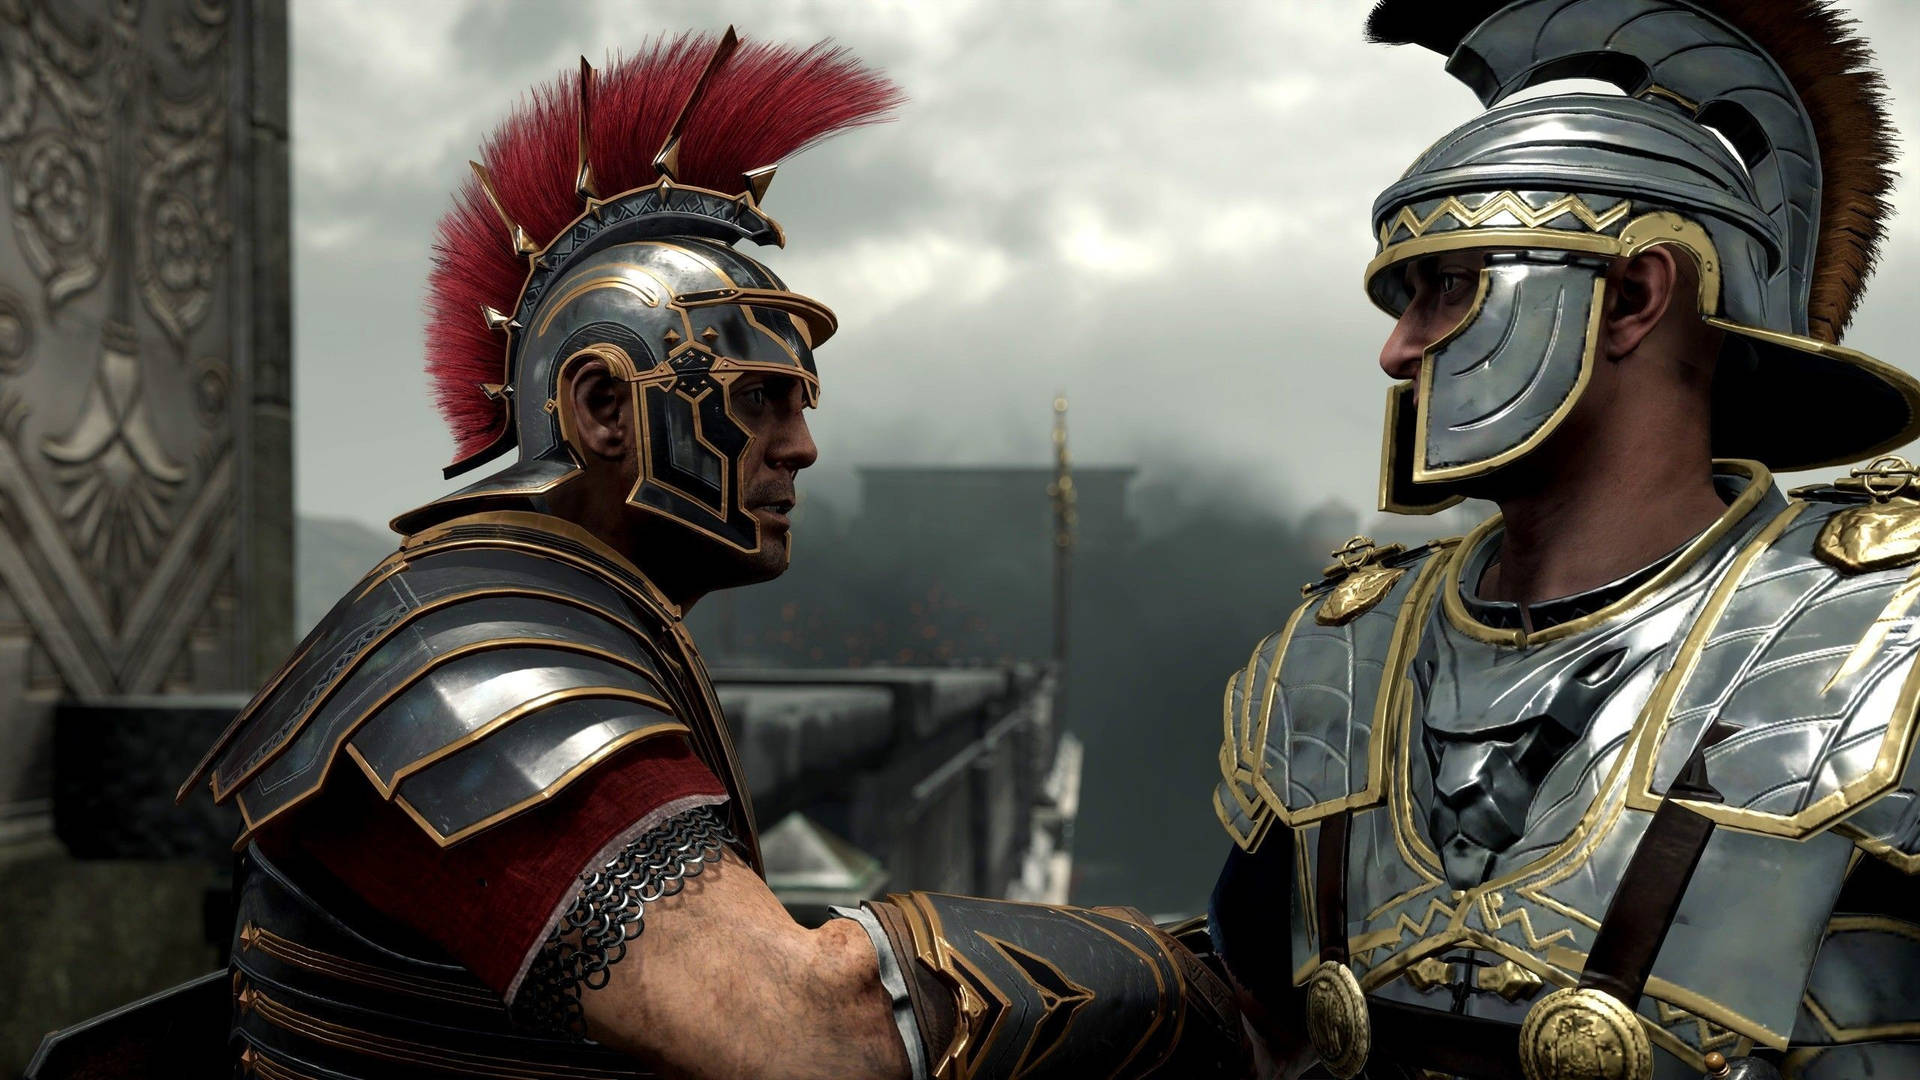 Epic Battle Scene With Roman Guards In Total War Rome 2. Background